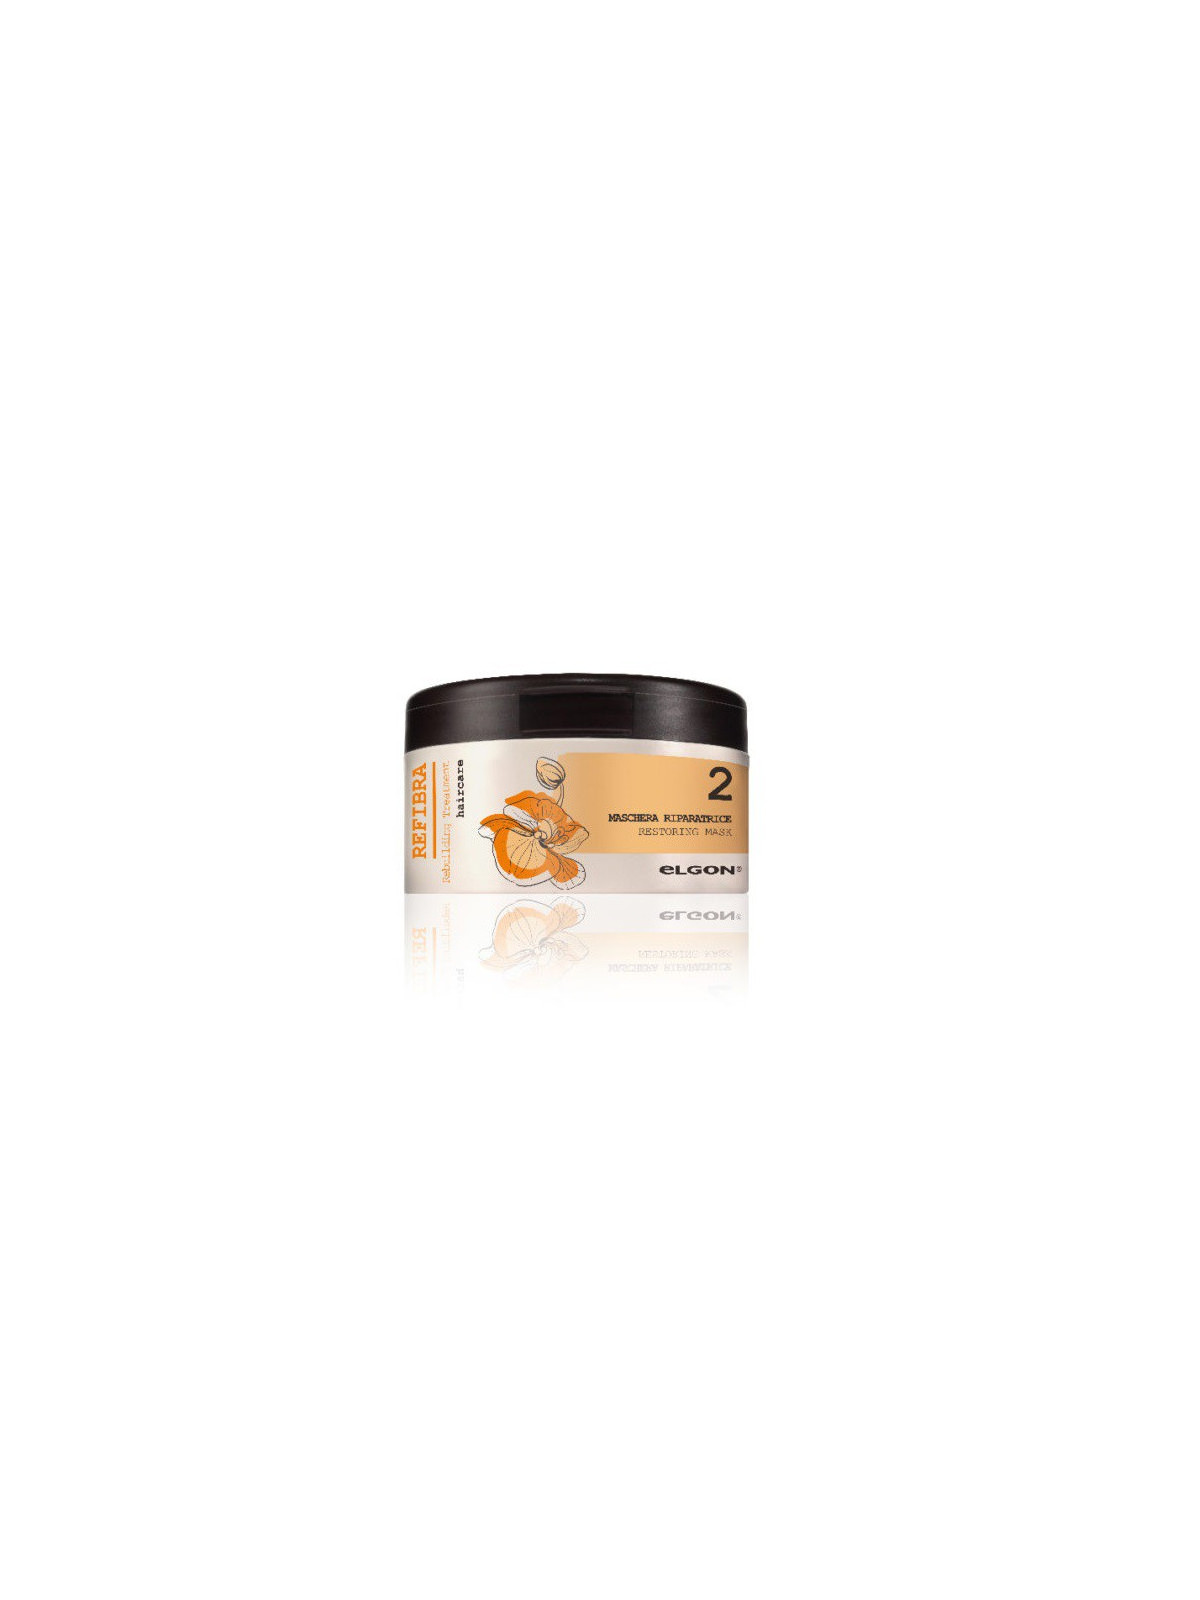 Refibra concentrated restoring mask 100 ml.